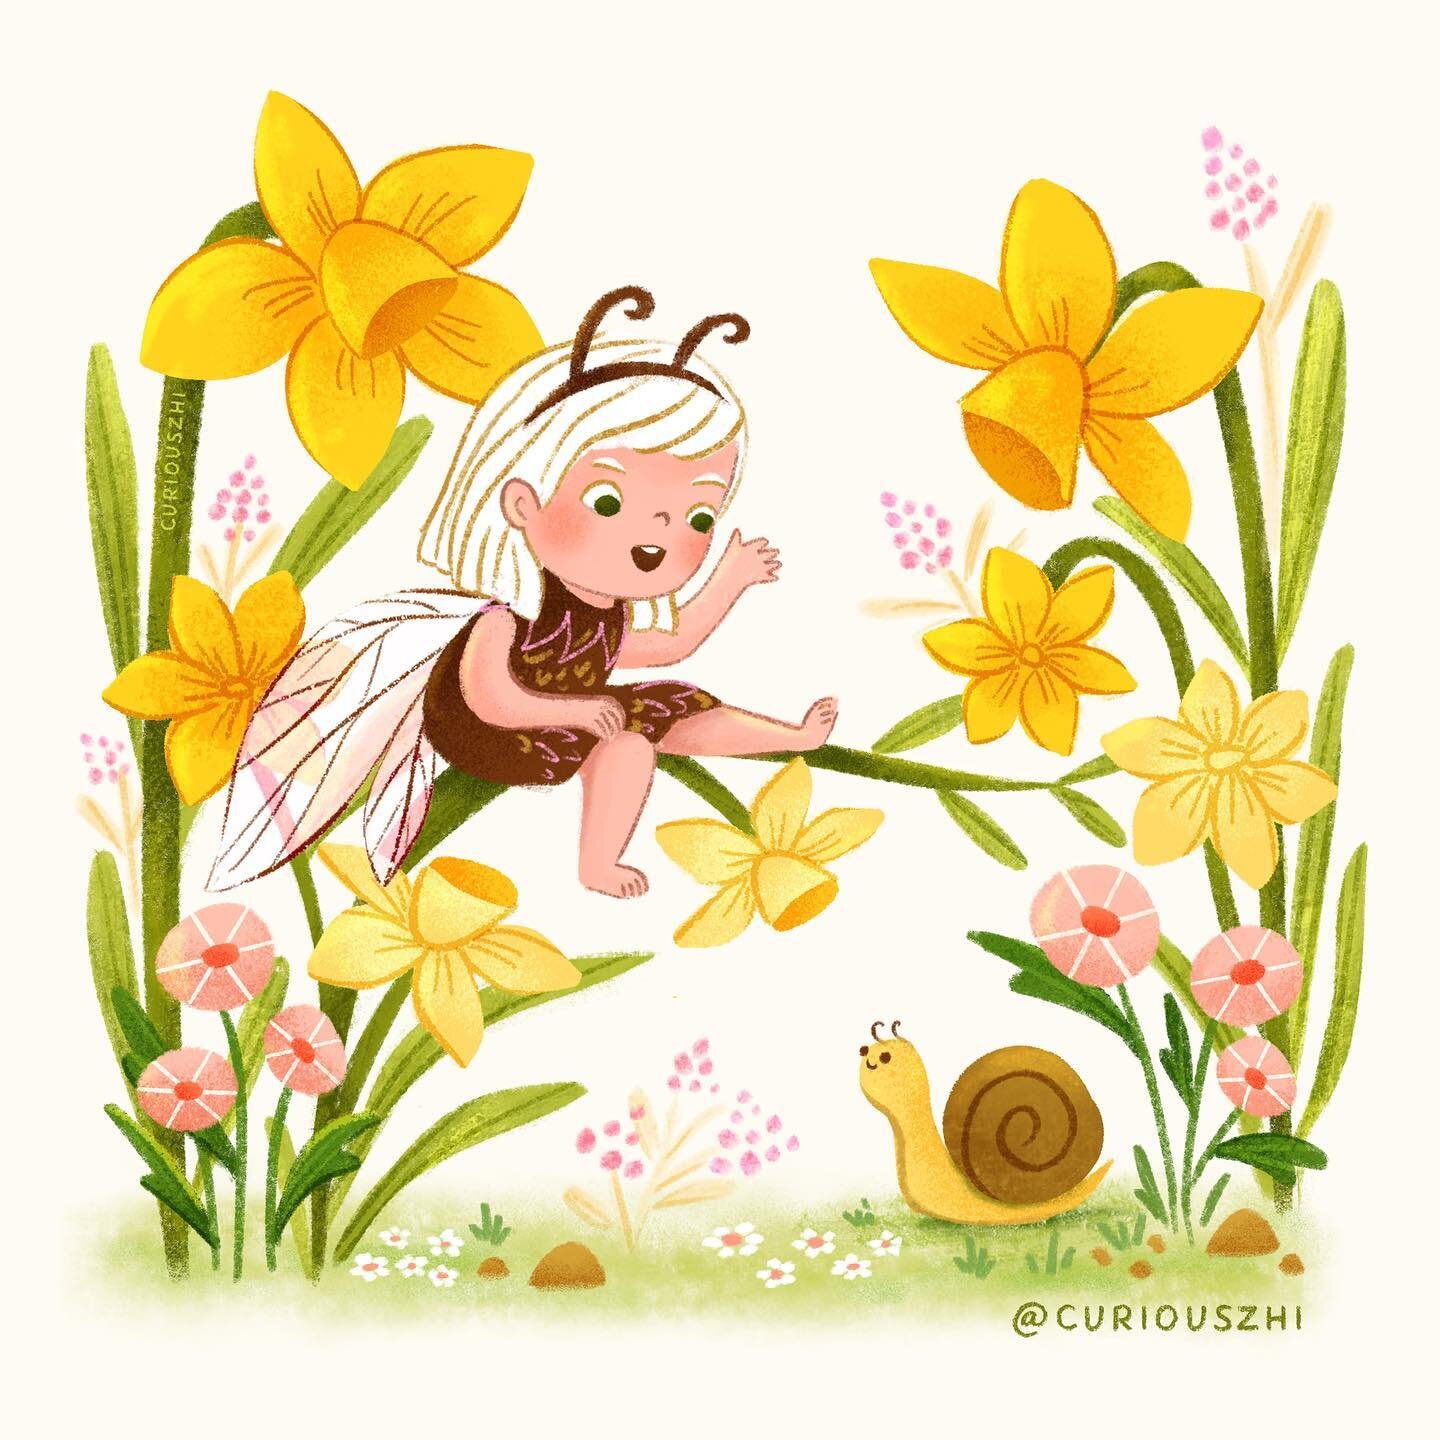 So glad to see the sun shining today☀️ and getting some more Spring-like weather. Reposting this little fairy piece from last year which I still really like. 🧚🏻&zwj;♀️🐌🌼
⠀
&mdash; 🏷 &mdash;
#curiouszhidraws #fairyillustration  #childrenbookart #